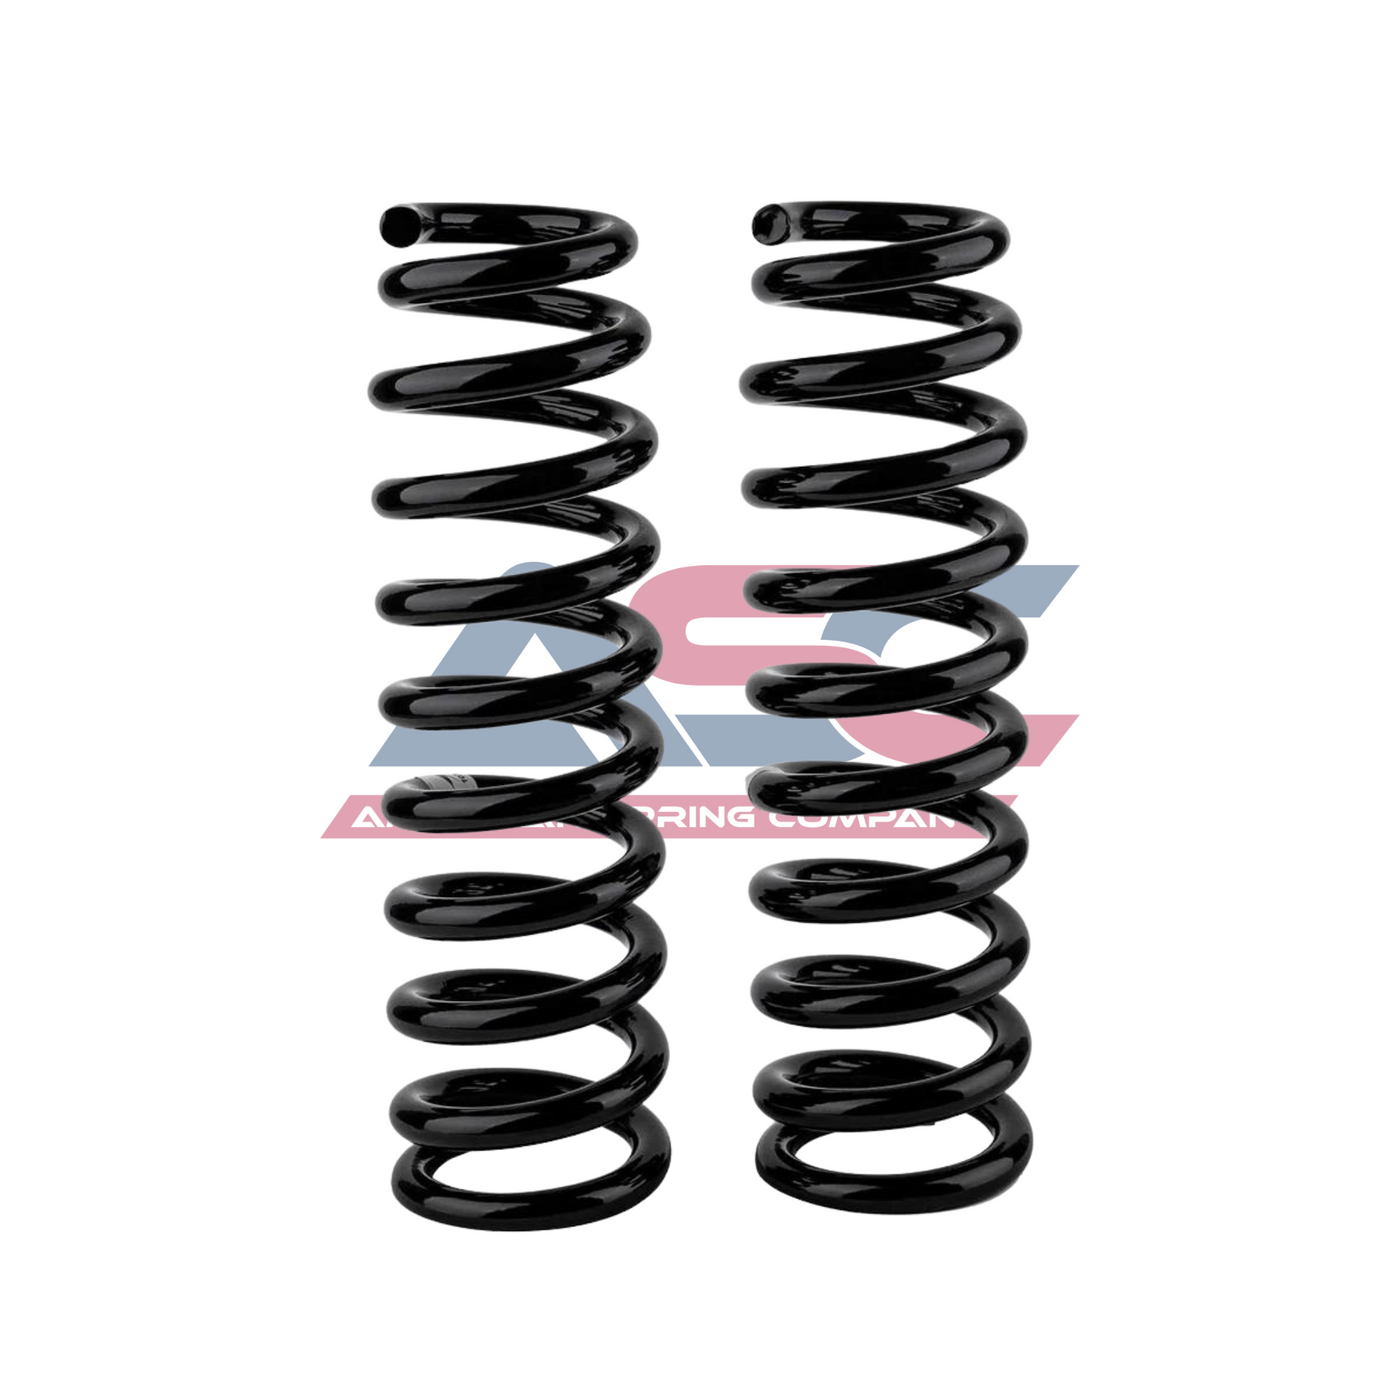 ASC4121 - 98-04 1st Gen Tacoma 1.5" Lift Front Springs